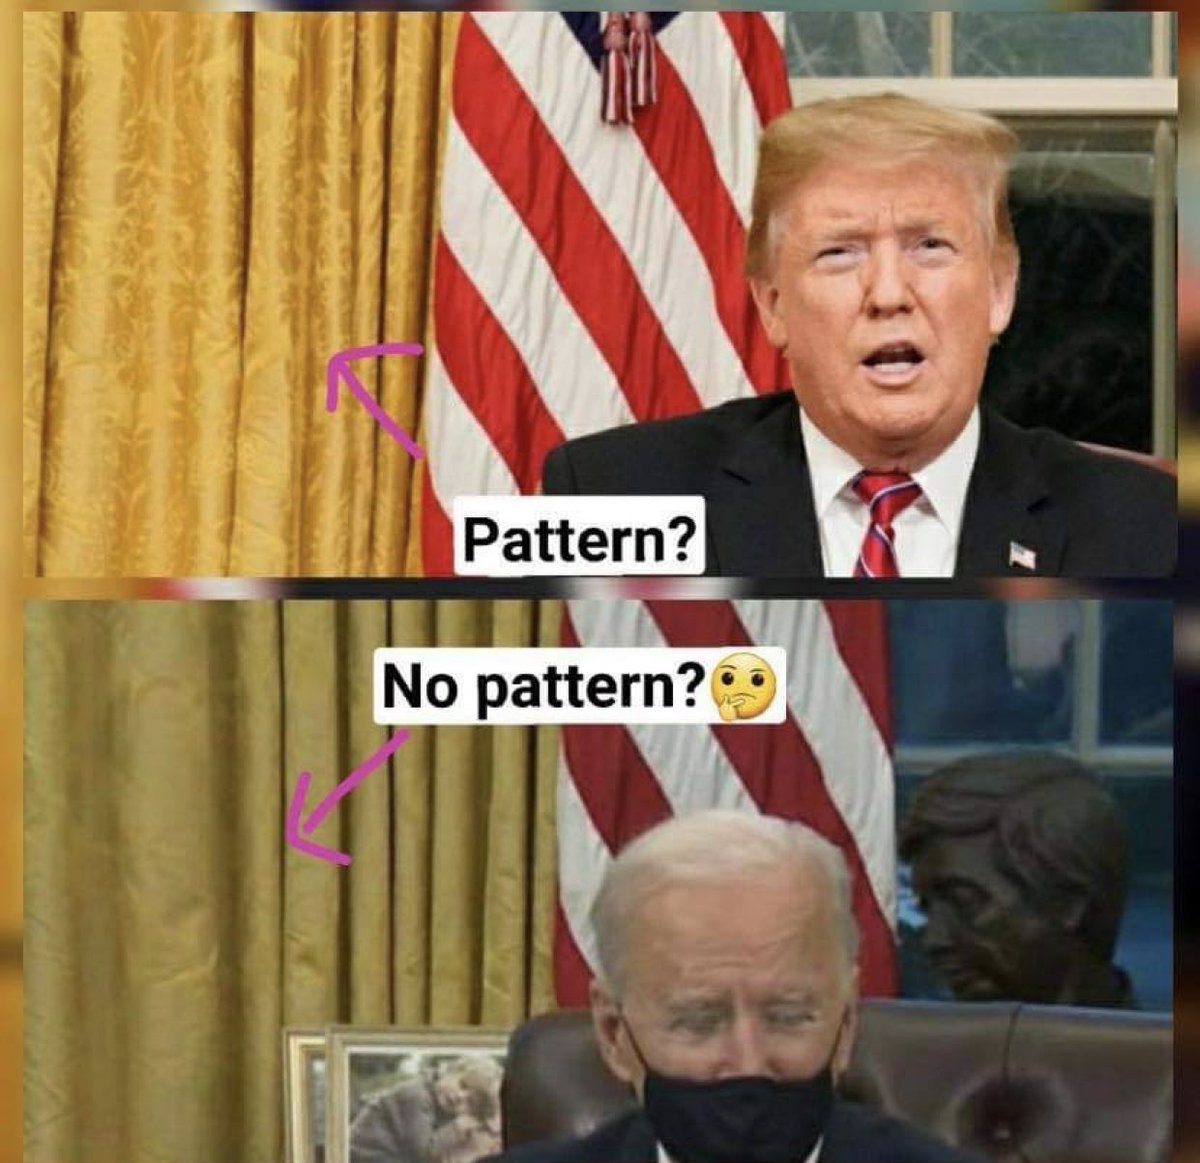 For instance take a look at this image. In the part with Trump there is a pattern on the curtains then looking behind Biden there is no pattern (keep in mind these photos are all within the past few days) now there is rumors of Biden “renovating the Oval Office” but yesterday...